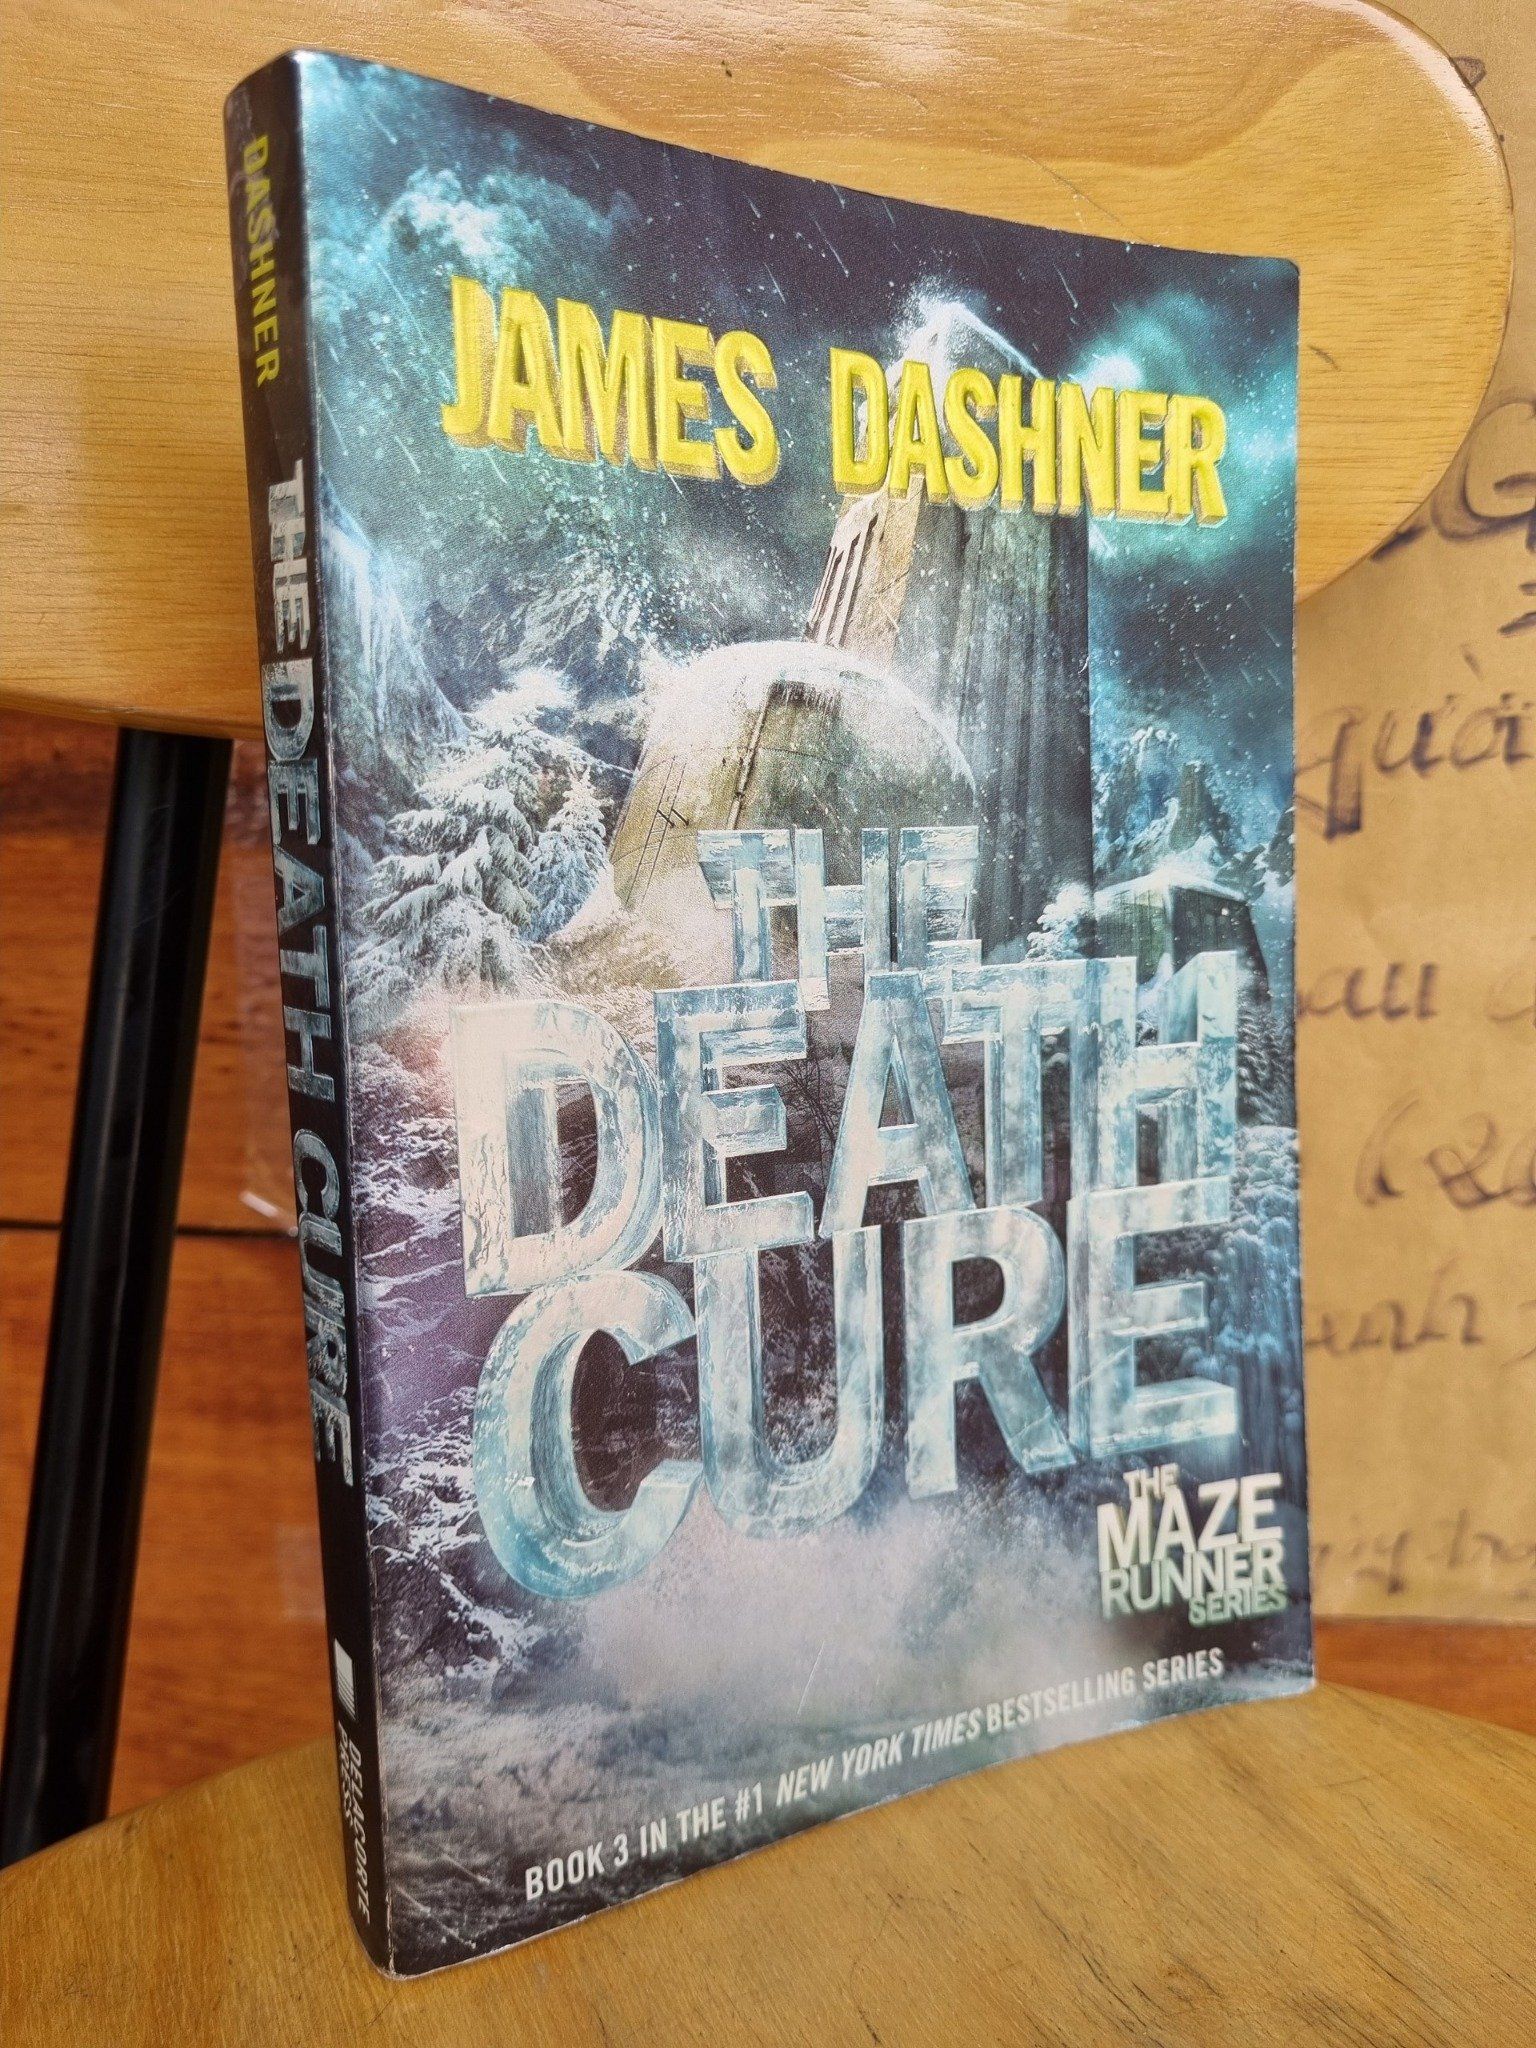  THE DEATH CURE : THE MAZE RUNNER SERIES - JAME DASHNER 